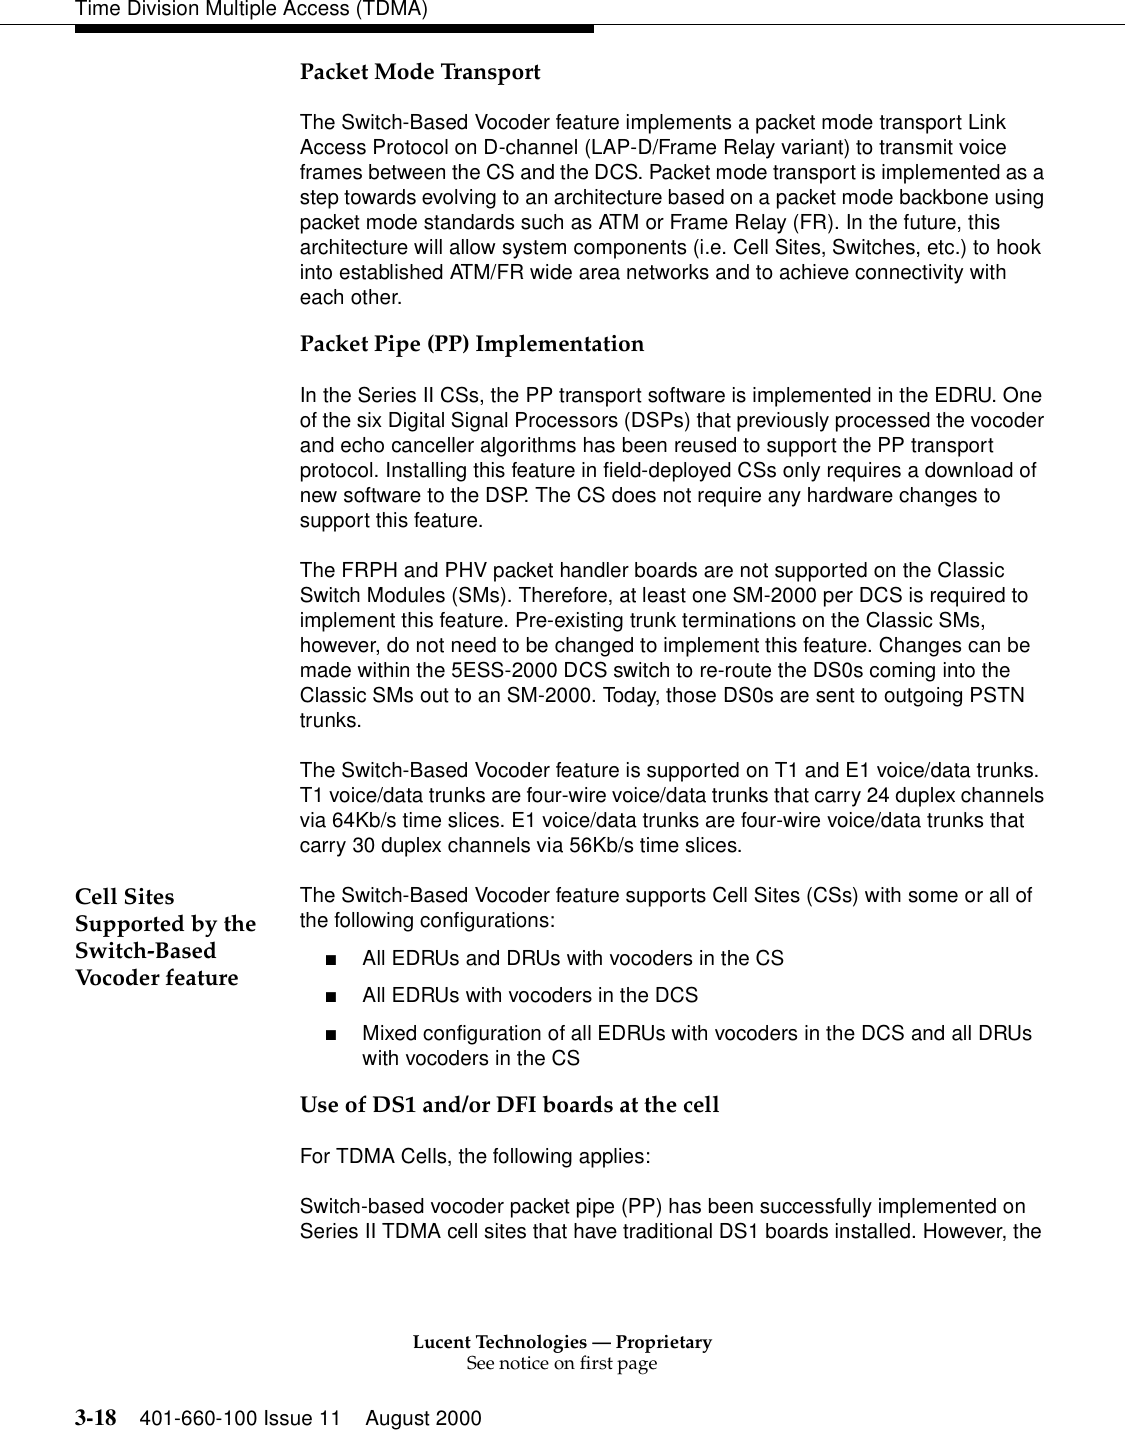 Lucent Technologies — ProprietarySee notice on first page3-18 401-660-100 Issue 11 August 2000Time Division Multiple Access (TDMA)Packet Mode TransportThe Switch-Based Vocoder feature implements a packet mode transport Link Access Protocol on D-channel (LAP-D/Frame Relay variant) to transmit voice frames between the CS and the DCS. Packet mode transport is implemented as a step towards evolving to an architecture based on a packet mode backbone using packet mode standards such as ATM or Frame Relay (FR). In the future, this architecture will allow system components (i.e. Cell Sites, Switches, etc.) to hook into established ATM/FR wide area networks and to achieve connectivity with each other. Packet Pipe (PP) ImplementationIn the Series II CSs, the PP transport software is implemented in the EDRU. One of the six Digital Signal Processors (DSPs) that previously processed the vocoder and echo canceller algorithms has been reused to support the PP transport protocol. Installing this feature in field-deployed CSs only requires a download of new software to the DSP. The CS does not require any hardware changes to support this feature. The FRPH and PHV packet handler boards are not supported on the Classic Switch Modules (SMs). Therefore, at least one SM-2000 per DCS is required to implement this feature. Pre-existing trunk terminations on the Classic SMs, however, do not need to be changed to implement this feature. Changes can be made within the 5ESS-2000 DCS switch to re-route the DS0s coming into the Classic SMs out to an SM-2000. Today, those DS0s are sent to outgoing PSTN trunks. The Switch-Based Vocoder feature is supported on T1 and E1 voice/data trunks. T1 voice/data trunks are four-wire voice/data trunks that carry 24 duplex channels via 64Kb/s time slices. E1 voice/data trunks are four-wire voice/data trunks that carry 30 duplex channels via 56Kb/s time slices. Cell Sites Supported by the Switch-Based Vocoder featureThe Switch-Based Vocoder feature supports Cell Sites (CSs) with some or all of the following configurations: ■All EDRUs and DRUs with vocoders in the CS■All EDRUs with vocoders in the DCS■Mixed configuration of all EDRUs with vocoders in the DCS and all DRUs with vocoders in the CSUse of DS1 and/or DFI boards at the cellFor TDMA Cells, the following applies: Switch-based vocoder packet pipe (PP) has been successfully implemented on Series II TDMA cell sites that have traditional DS1 boards installed. However, the 